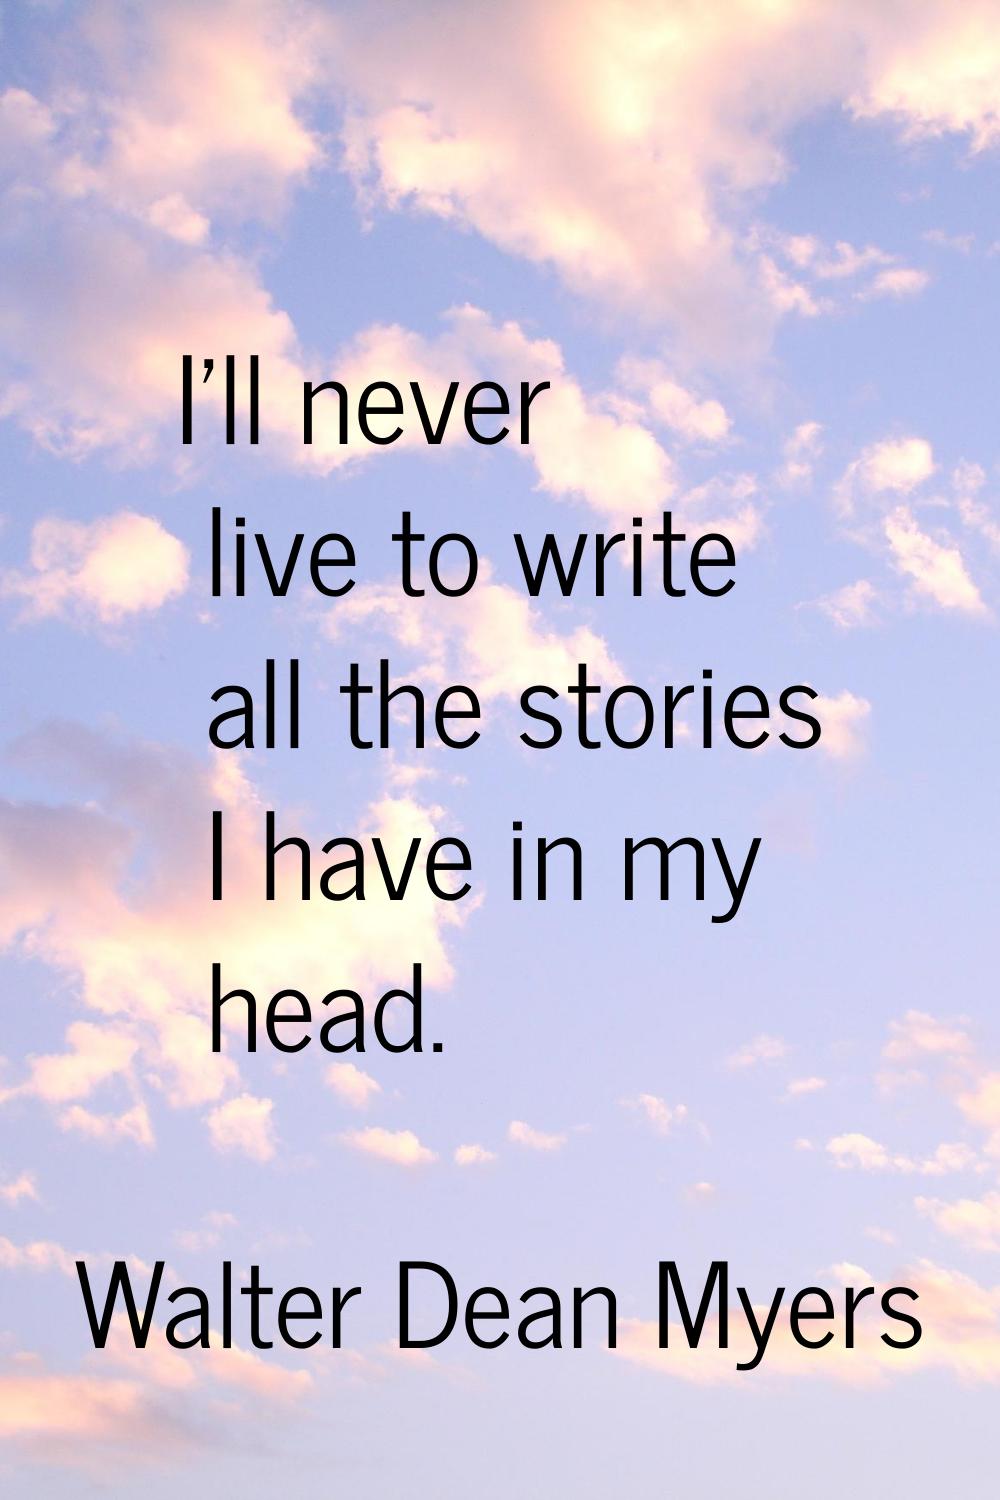 I'll never live to write all the stories I have in my head.